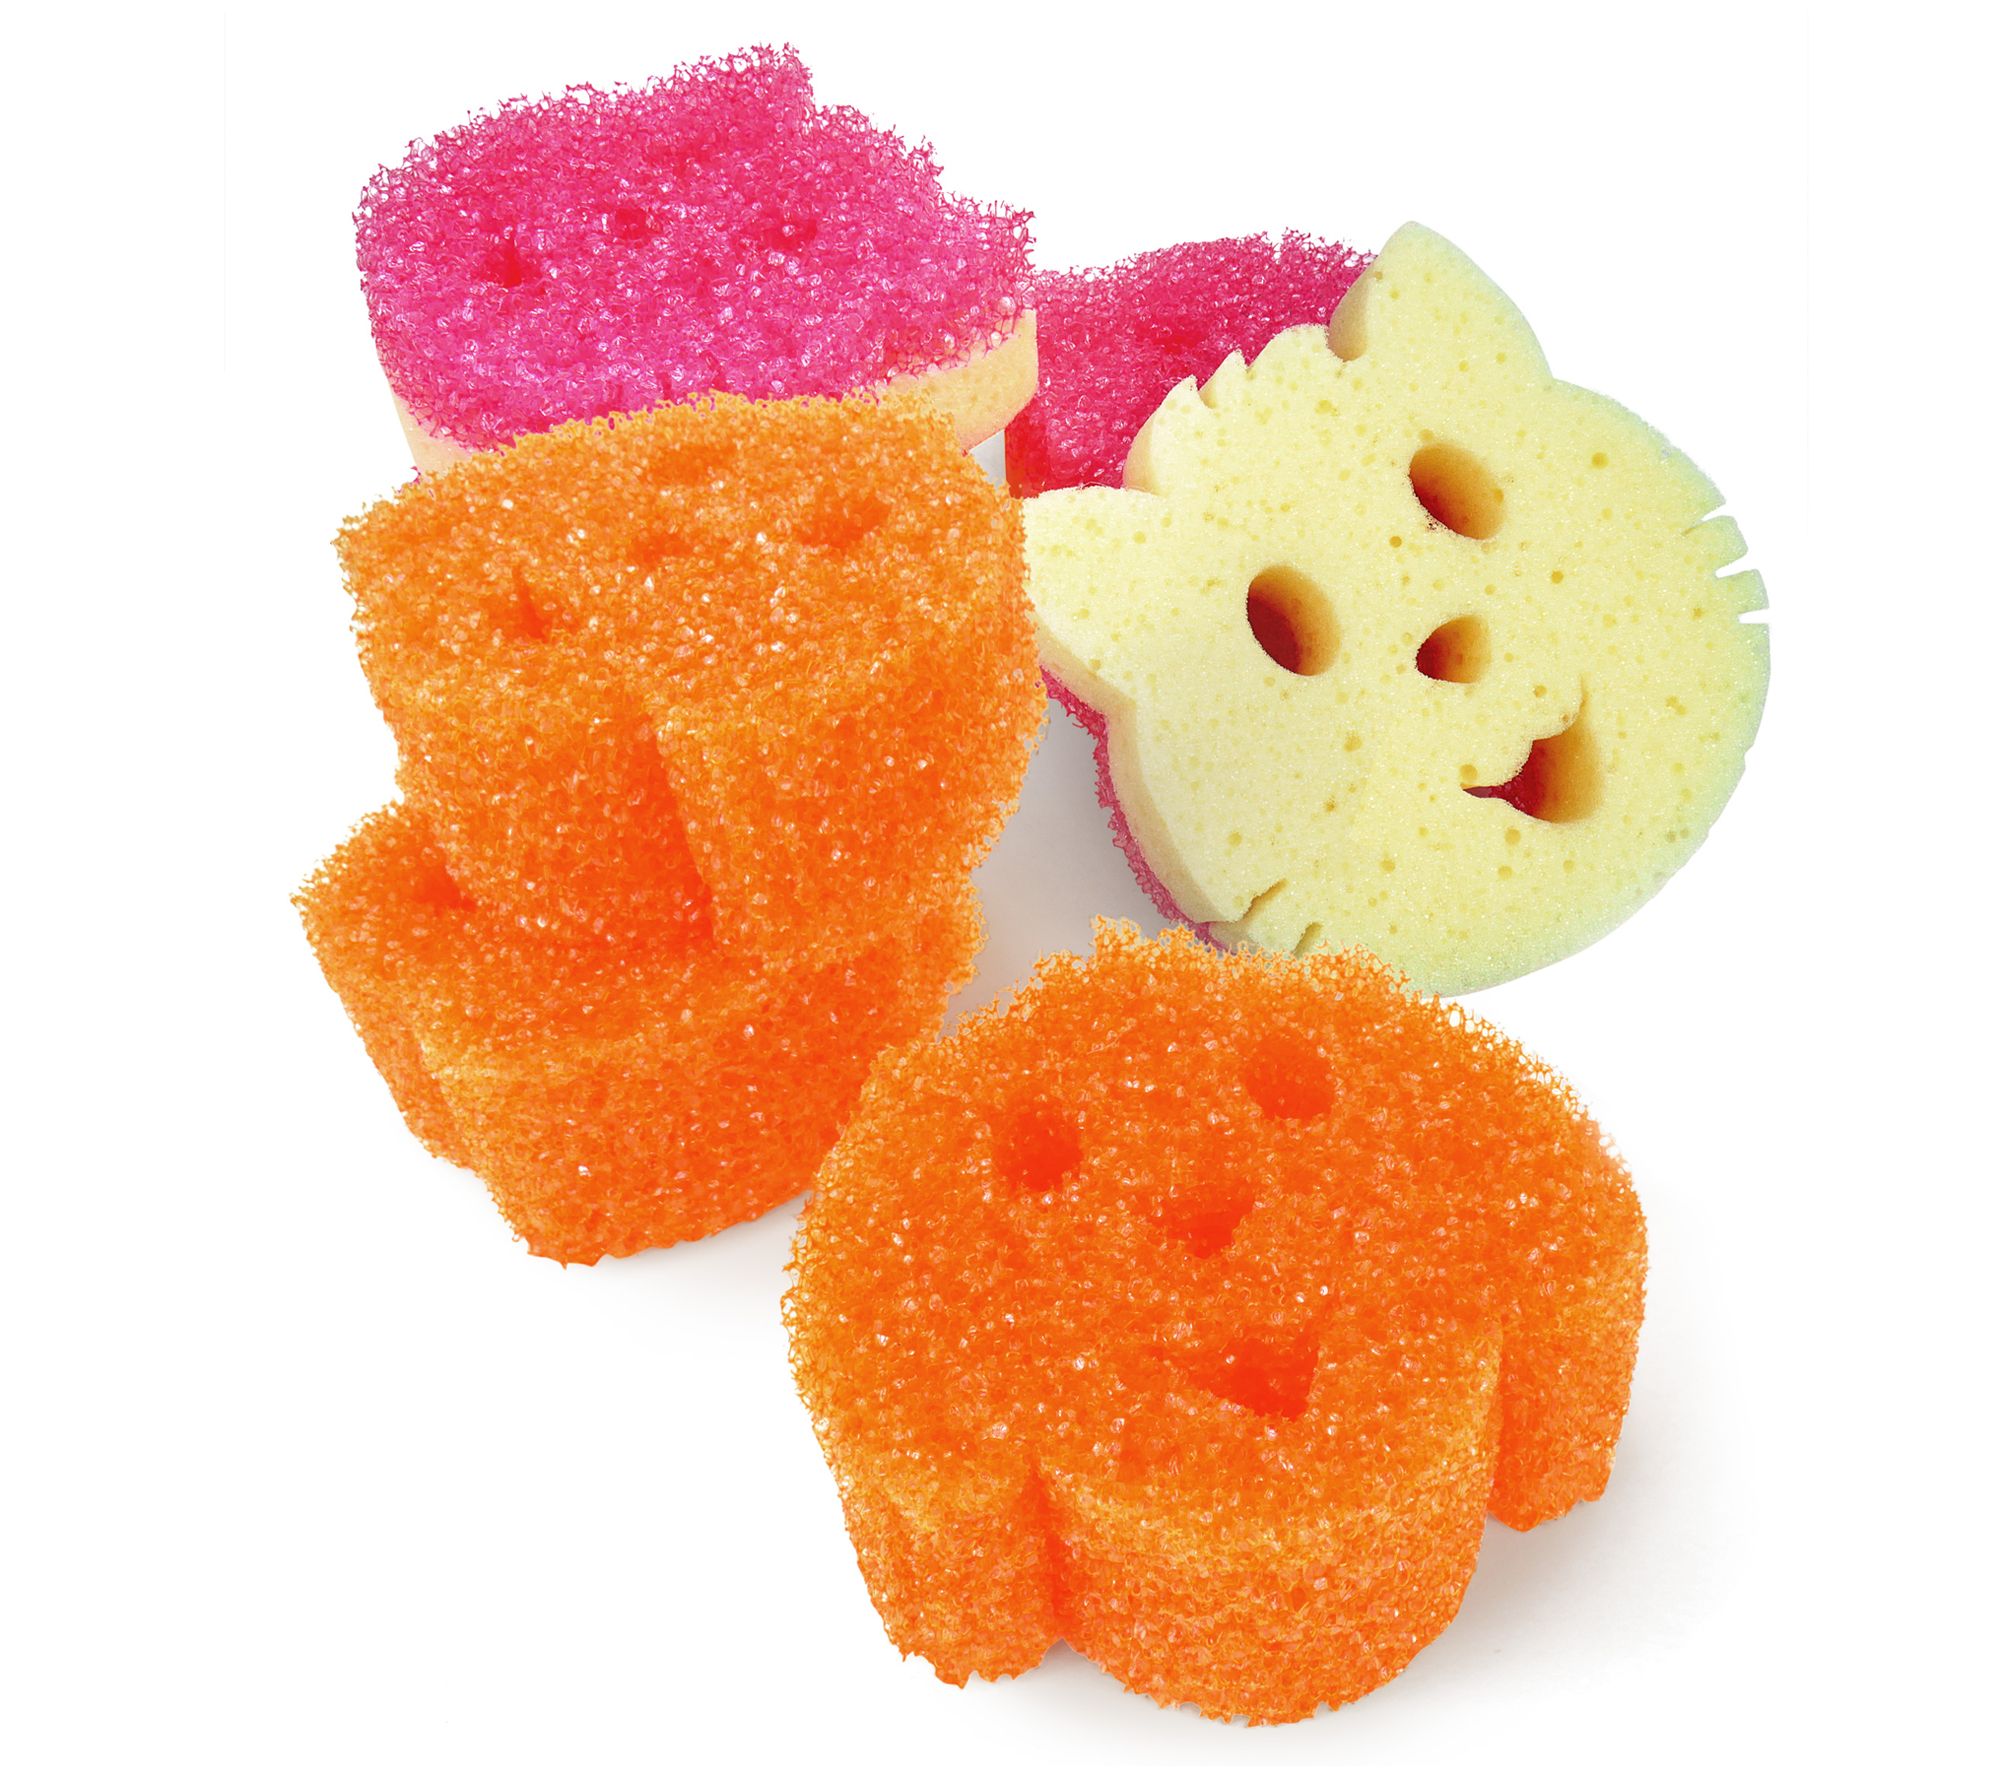 Scrub Daddy Pets - Two New Sponges Have Arrived! – Scrub Daddy